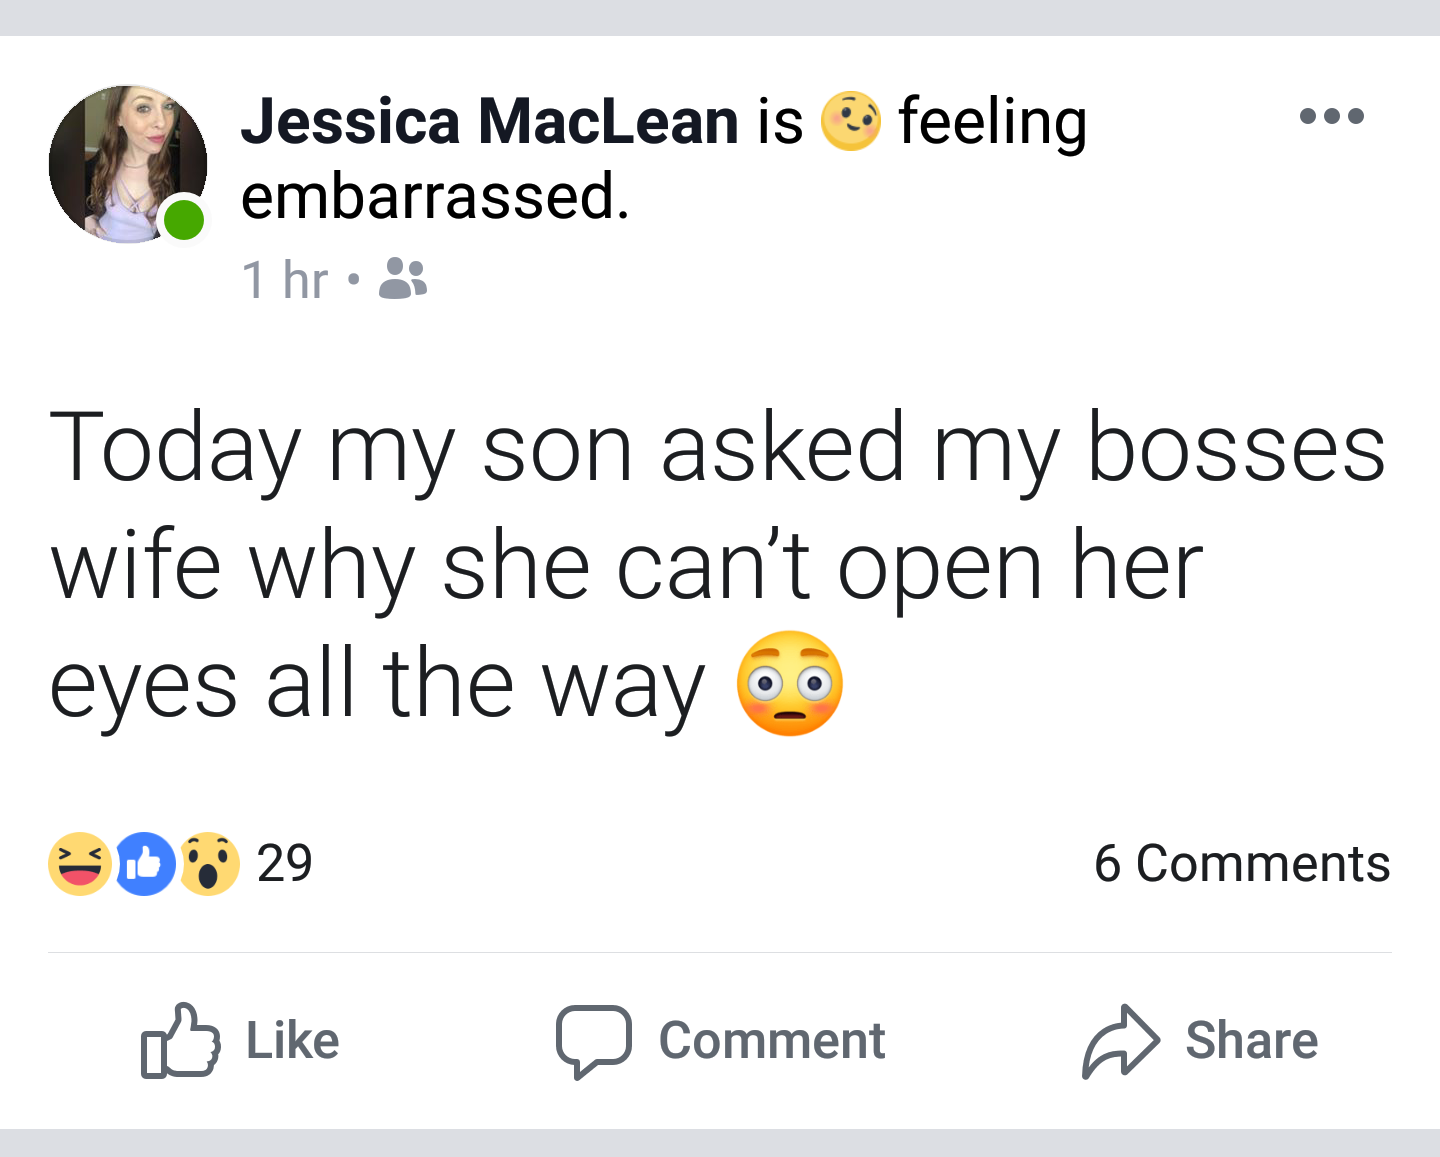 angle - feeling Jessica MacLean is embarrassed. 1 hr % Today my son asked my bosses wife why she can't open her eyes all the way 6.0 30% 29 6 D Comment